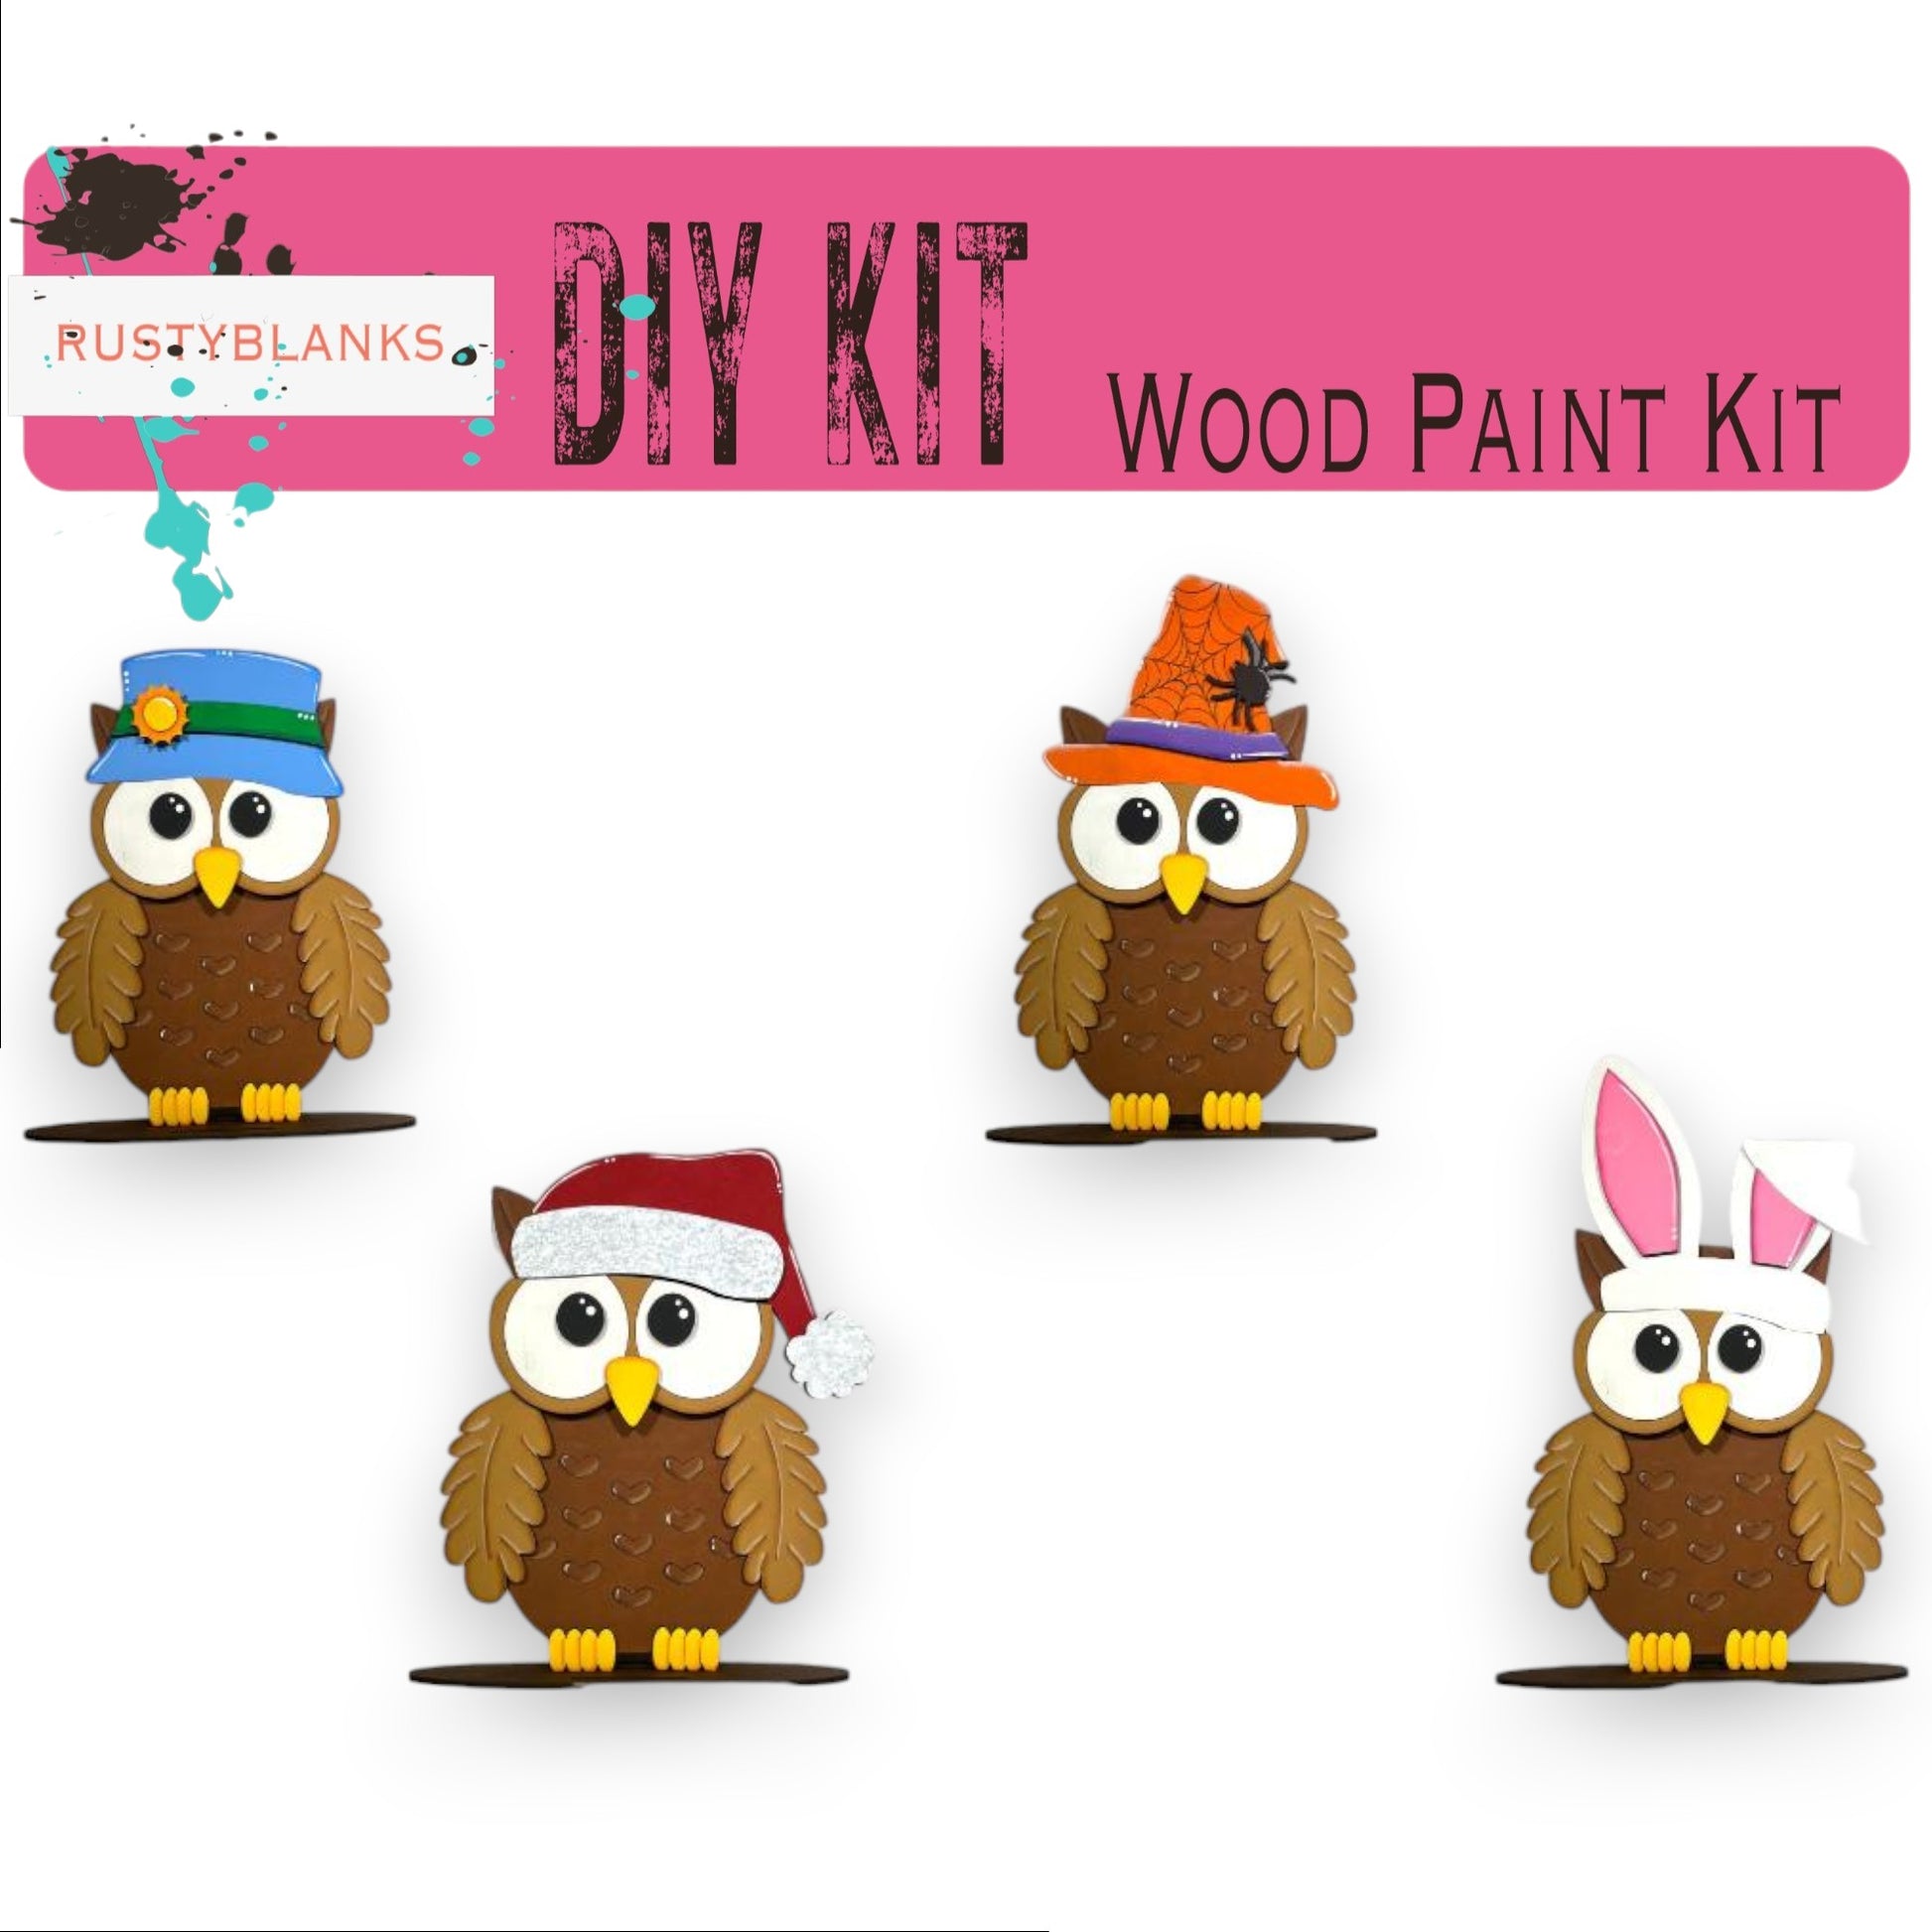 a picture of a wooden paint kit of an owl wearing a hat